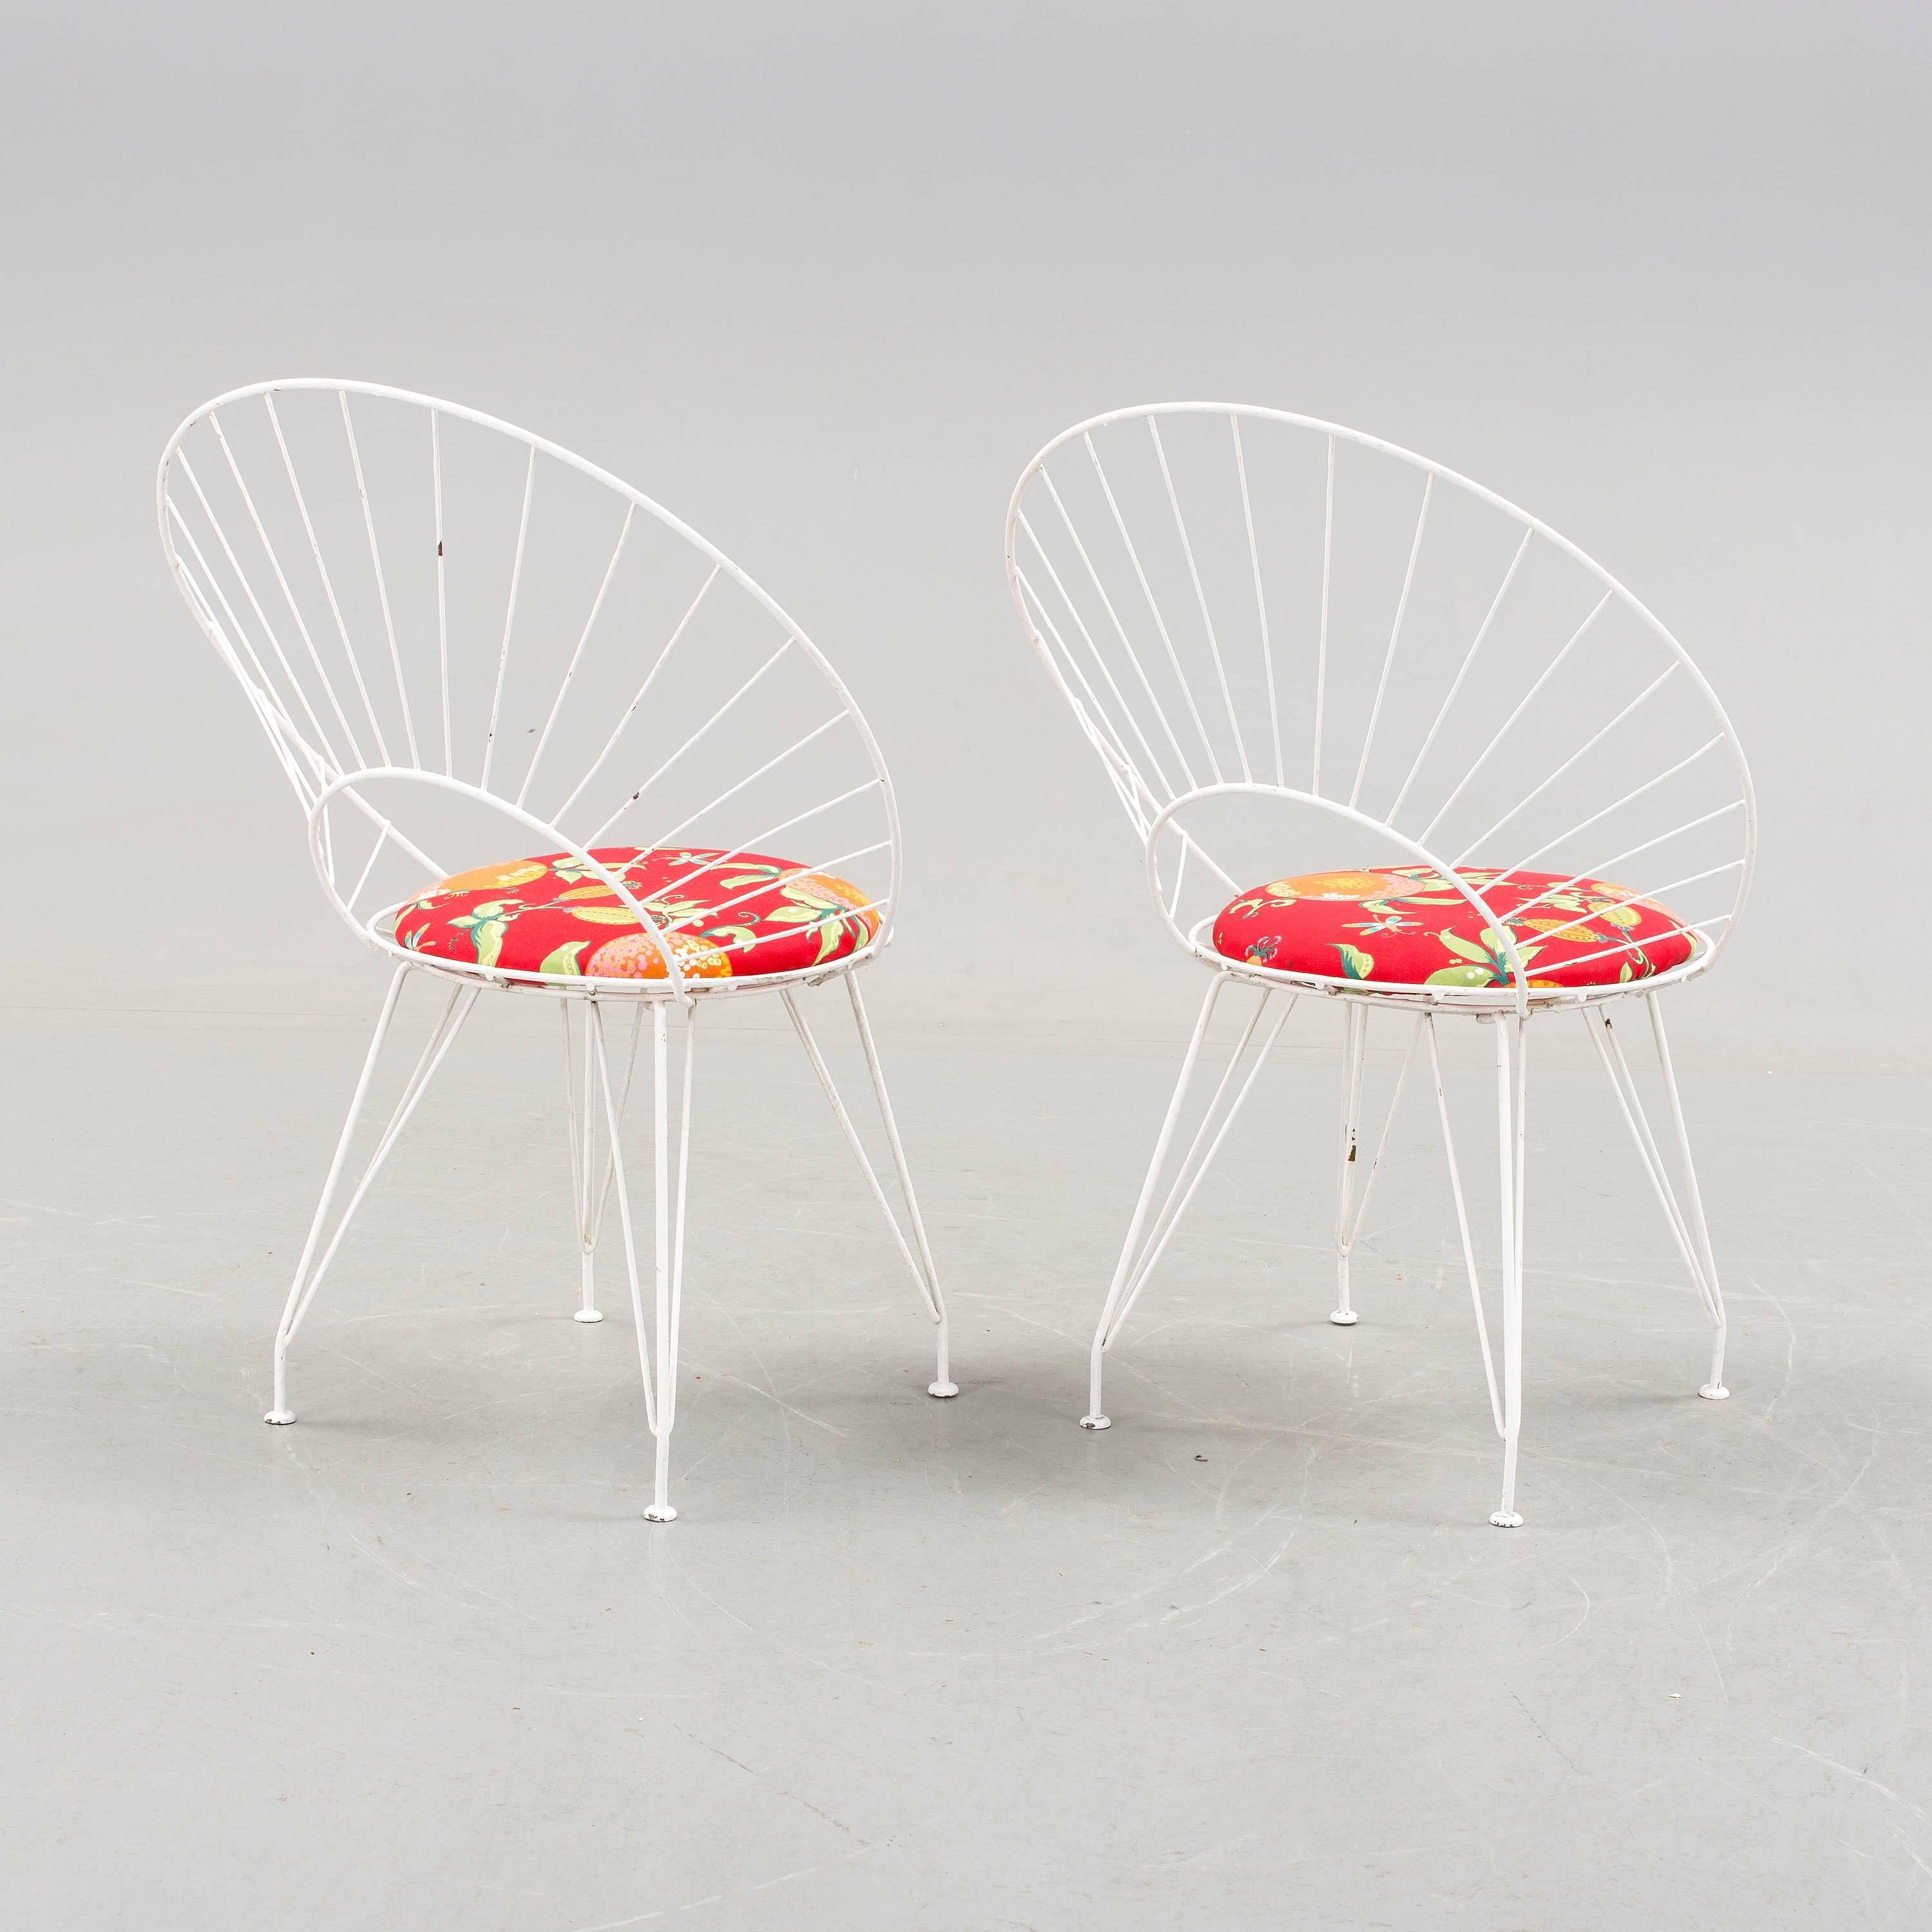 Set of original vintage garden chairs designed by Ingve Ekström. 
Model 'Desiree' made of white painted iron with original upholstered cushions.

Six chairs available.